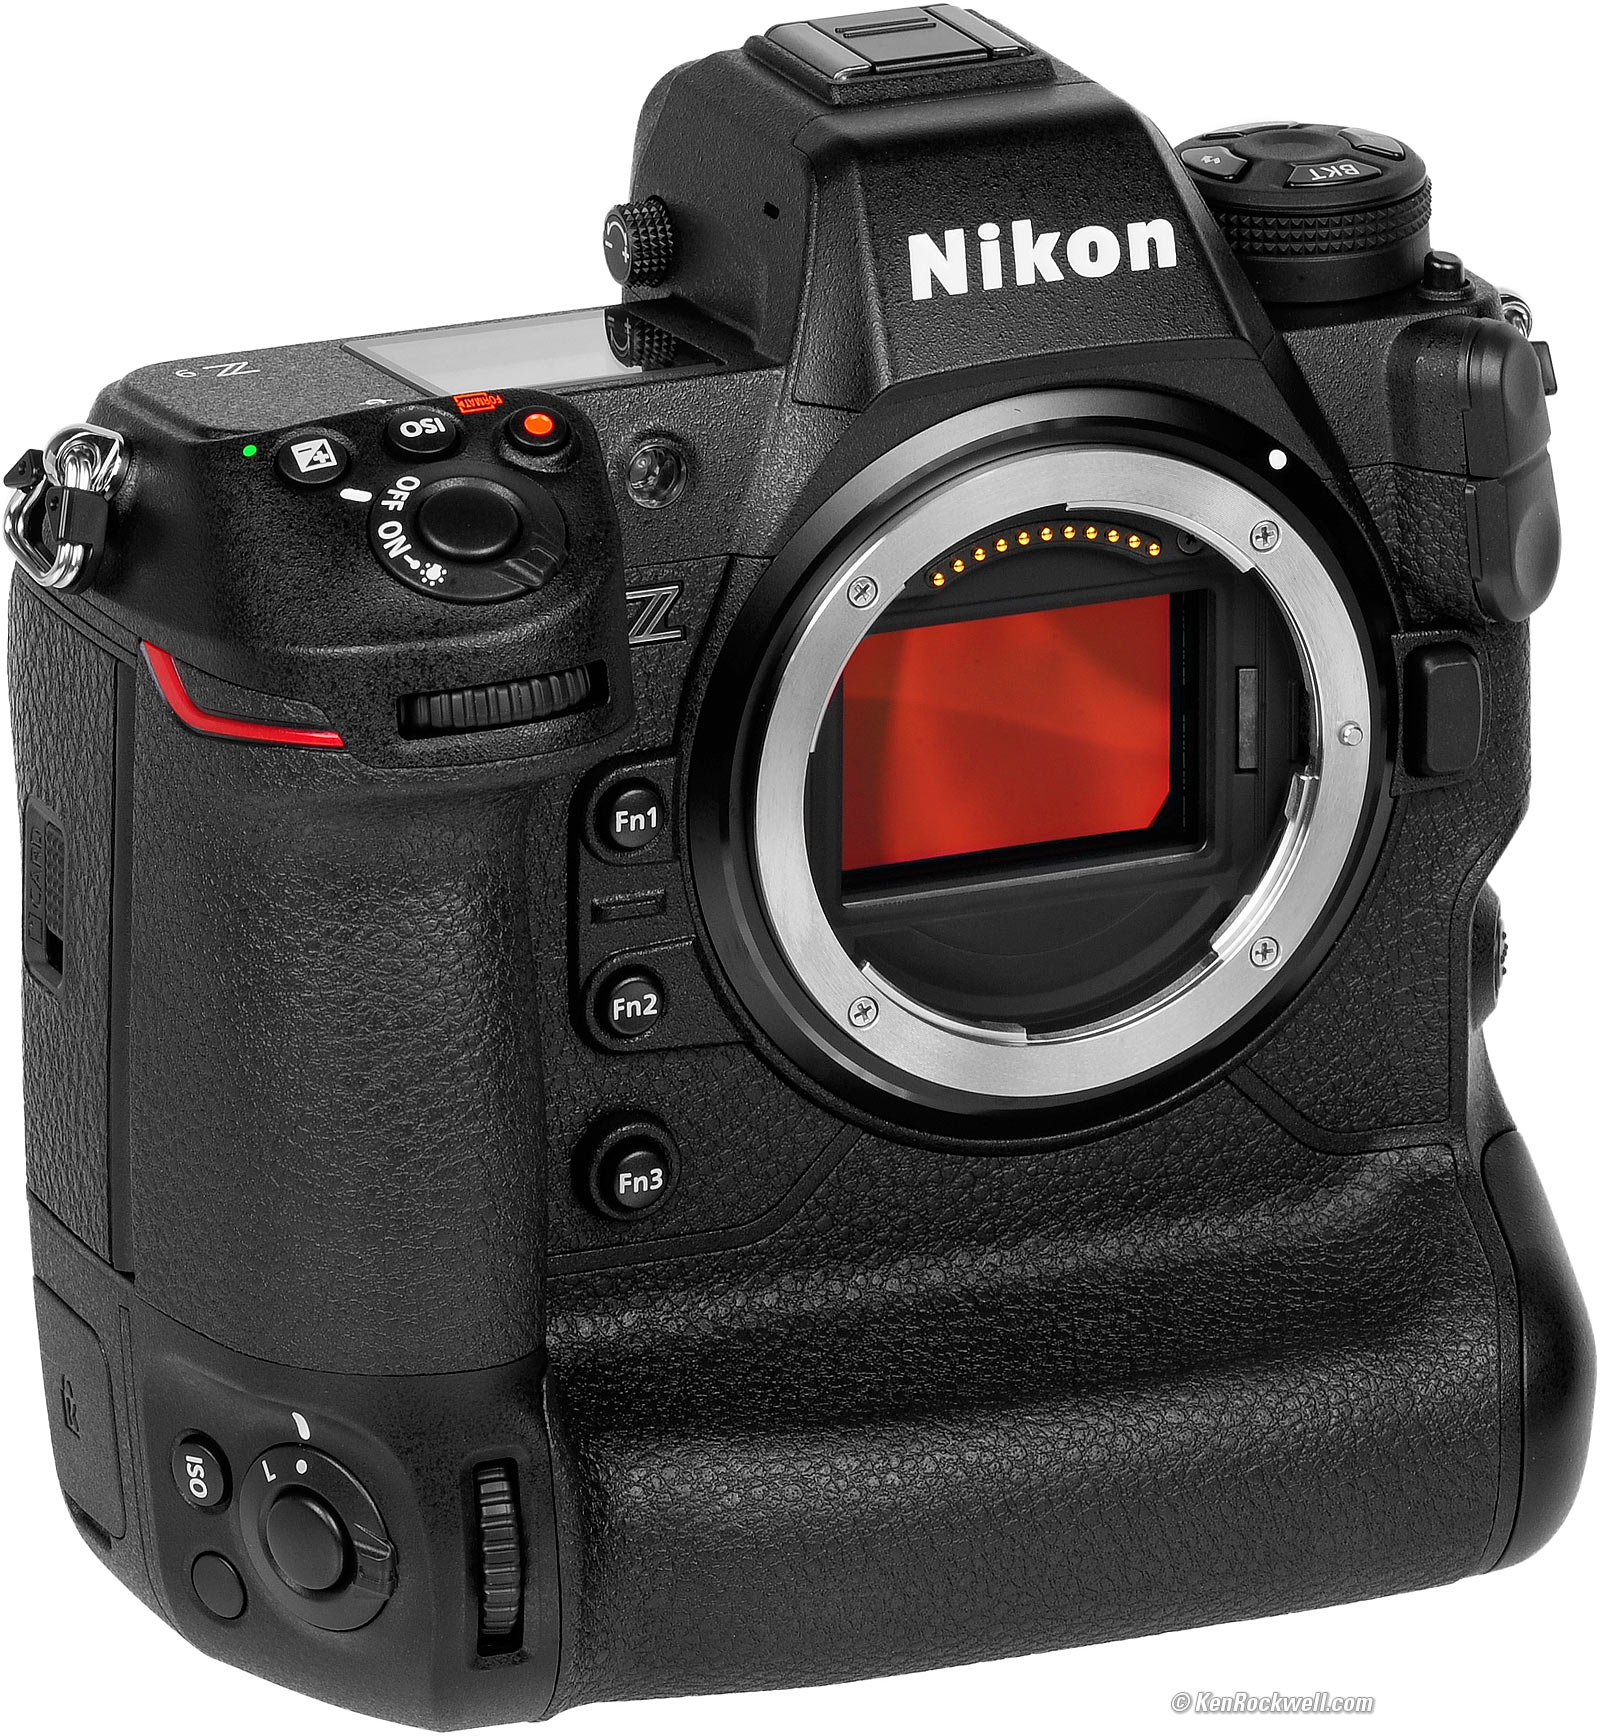 Nikon Z8 reviewed: All the advantages of the Z9 in a smaller package?